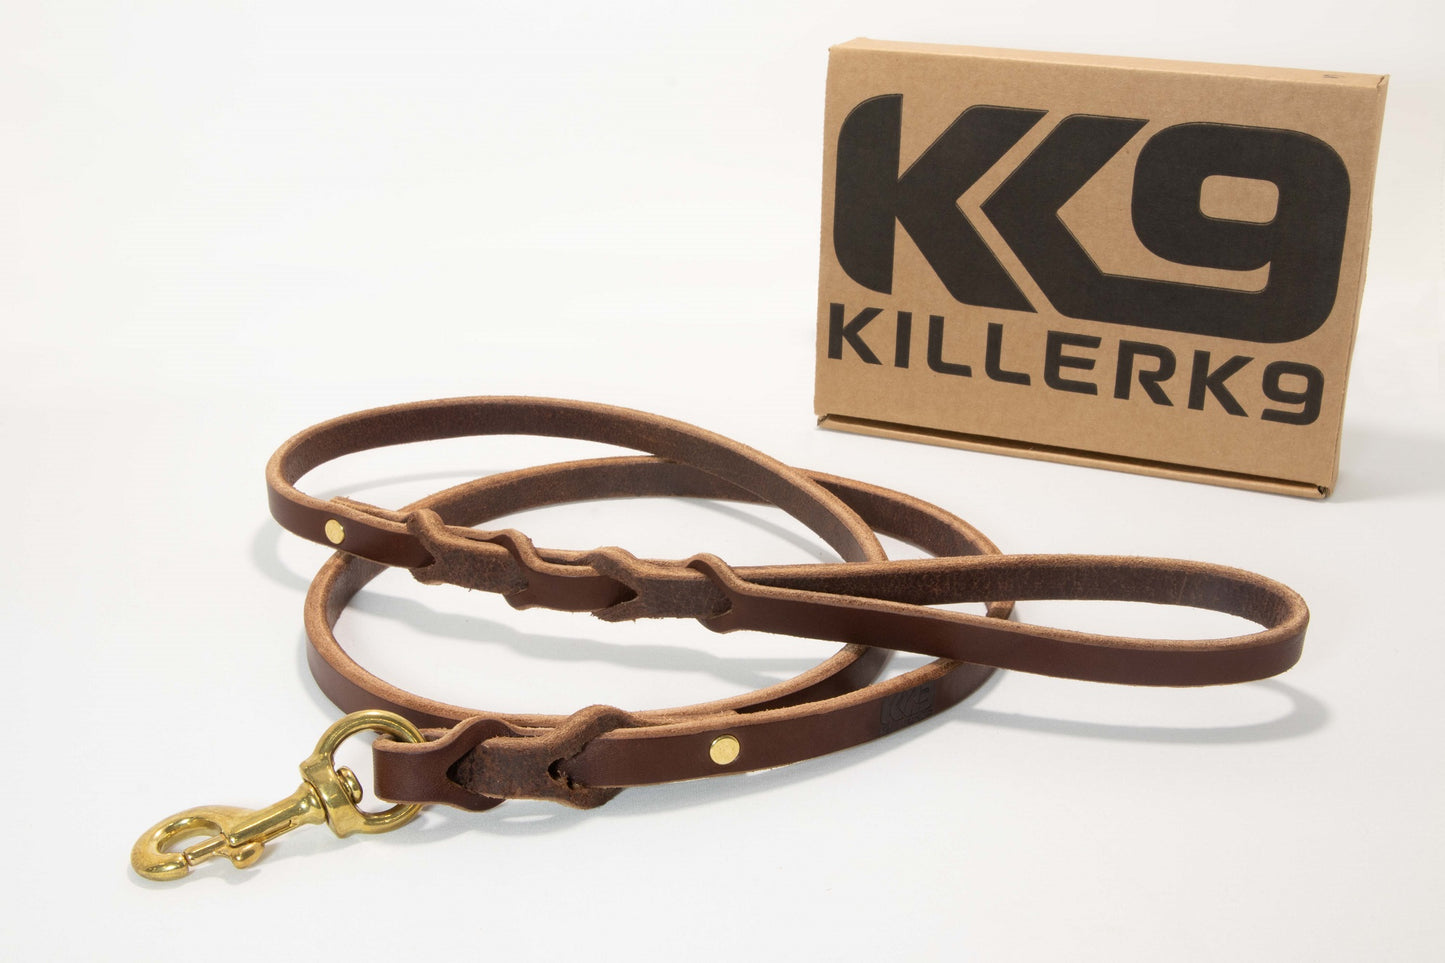 Killer K9 German Designed Amish Made Super Heavy Duty Leather Military and Police Training Leashes, 1/4 inch thick leather, solid brass connector snap, Set of 3 leashes